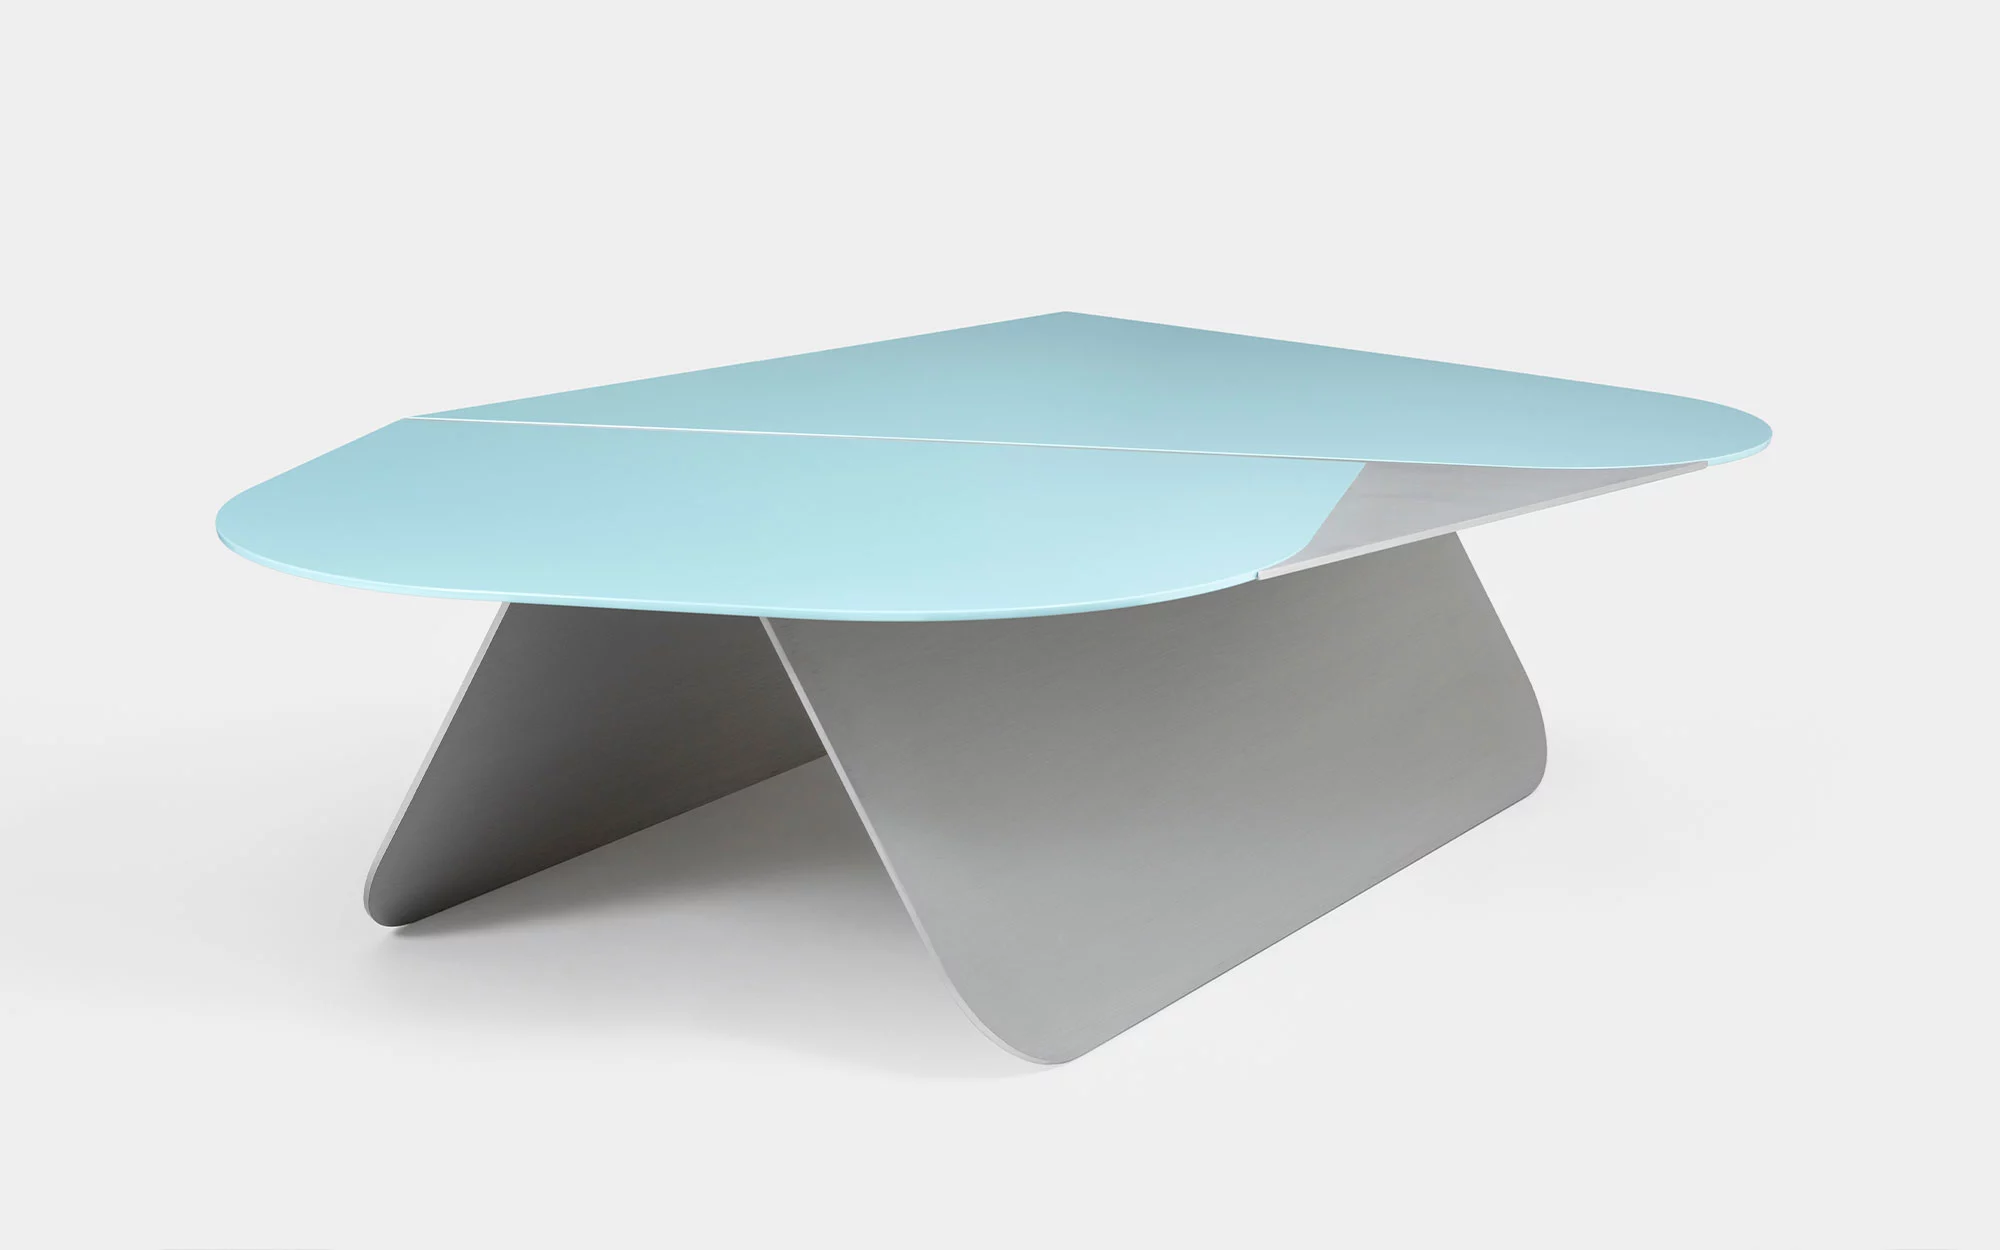 Large DB Coffee Table - Pierre Charpin - Console - Galerie kreo